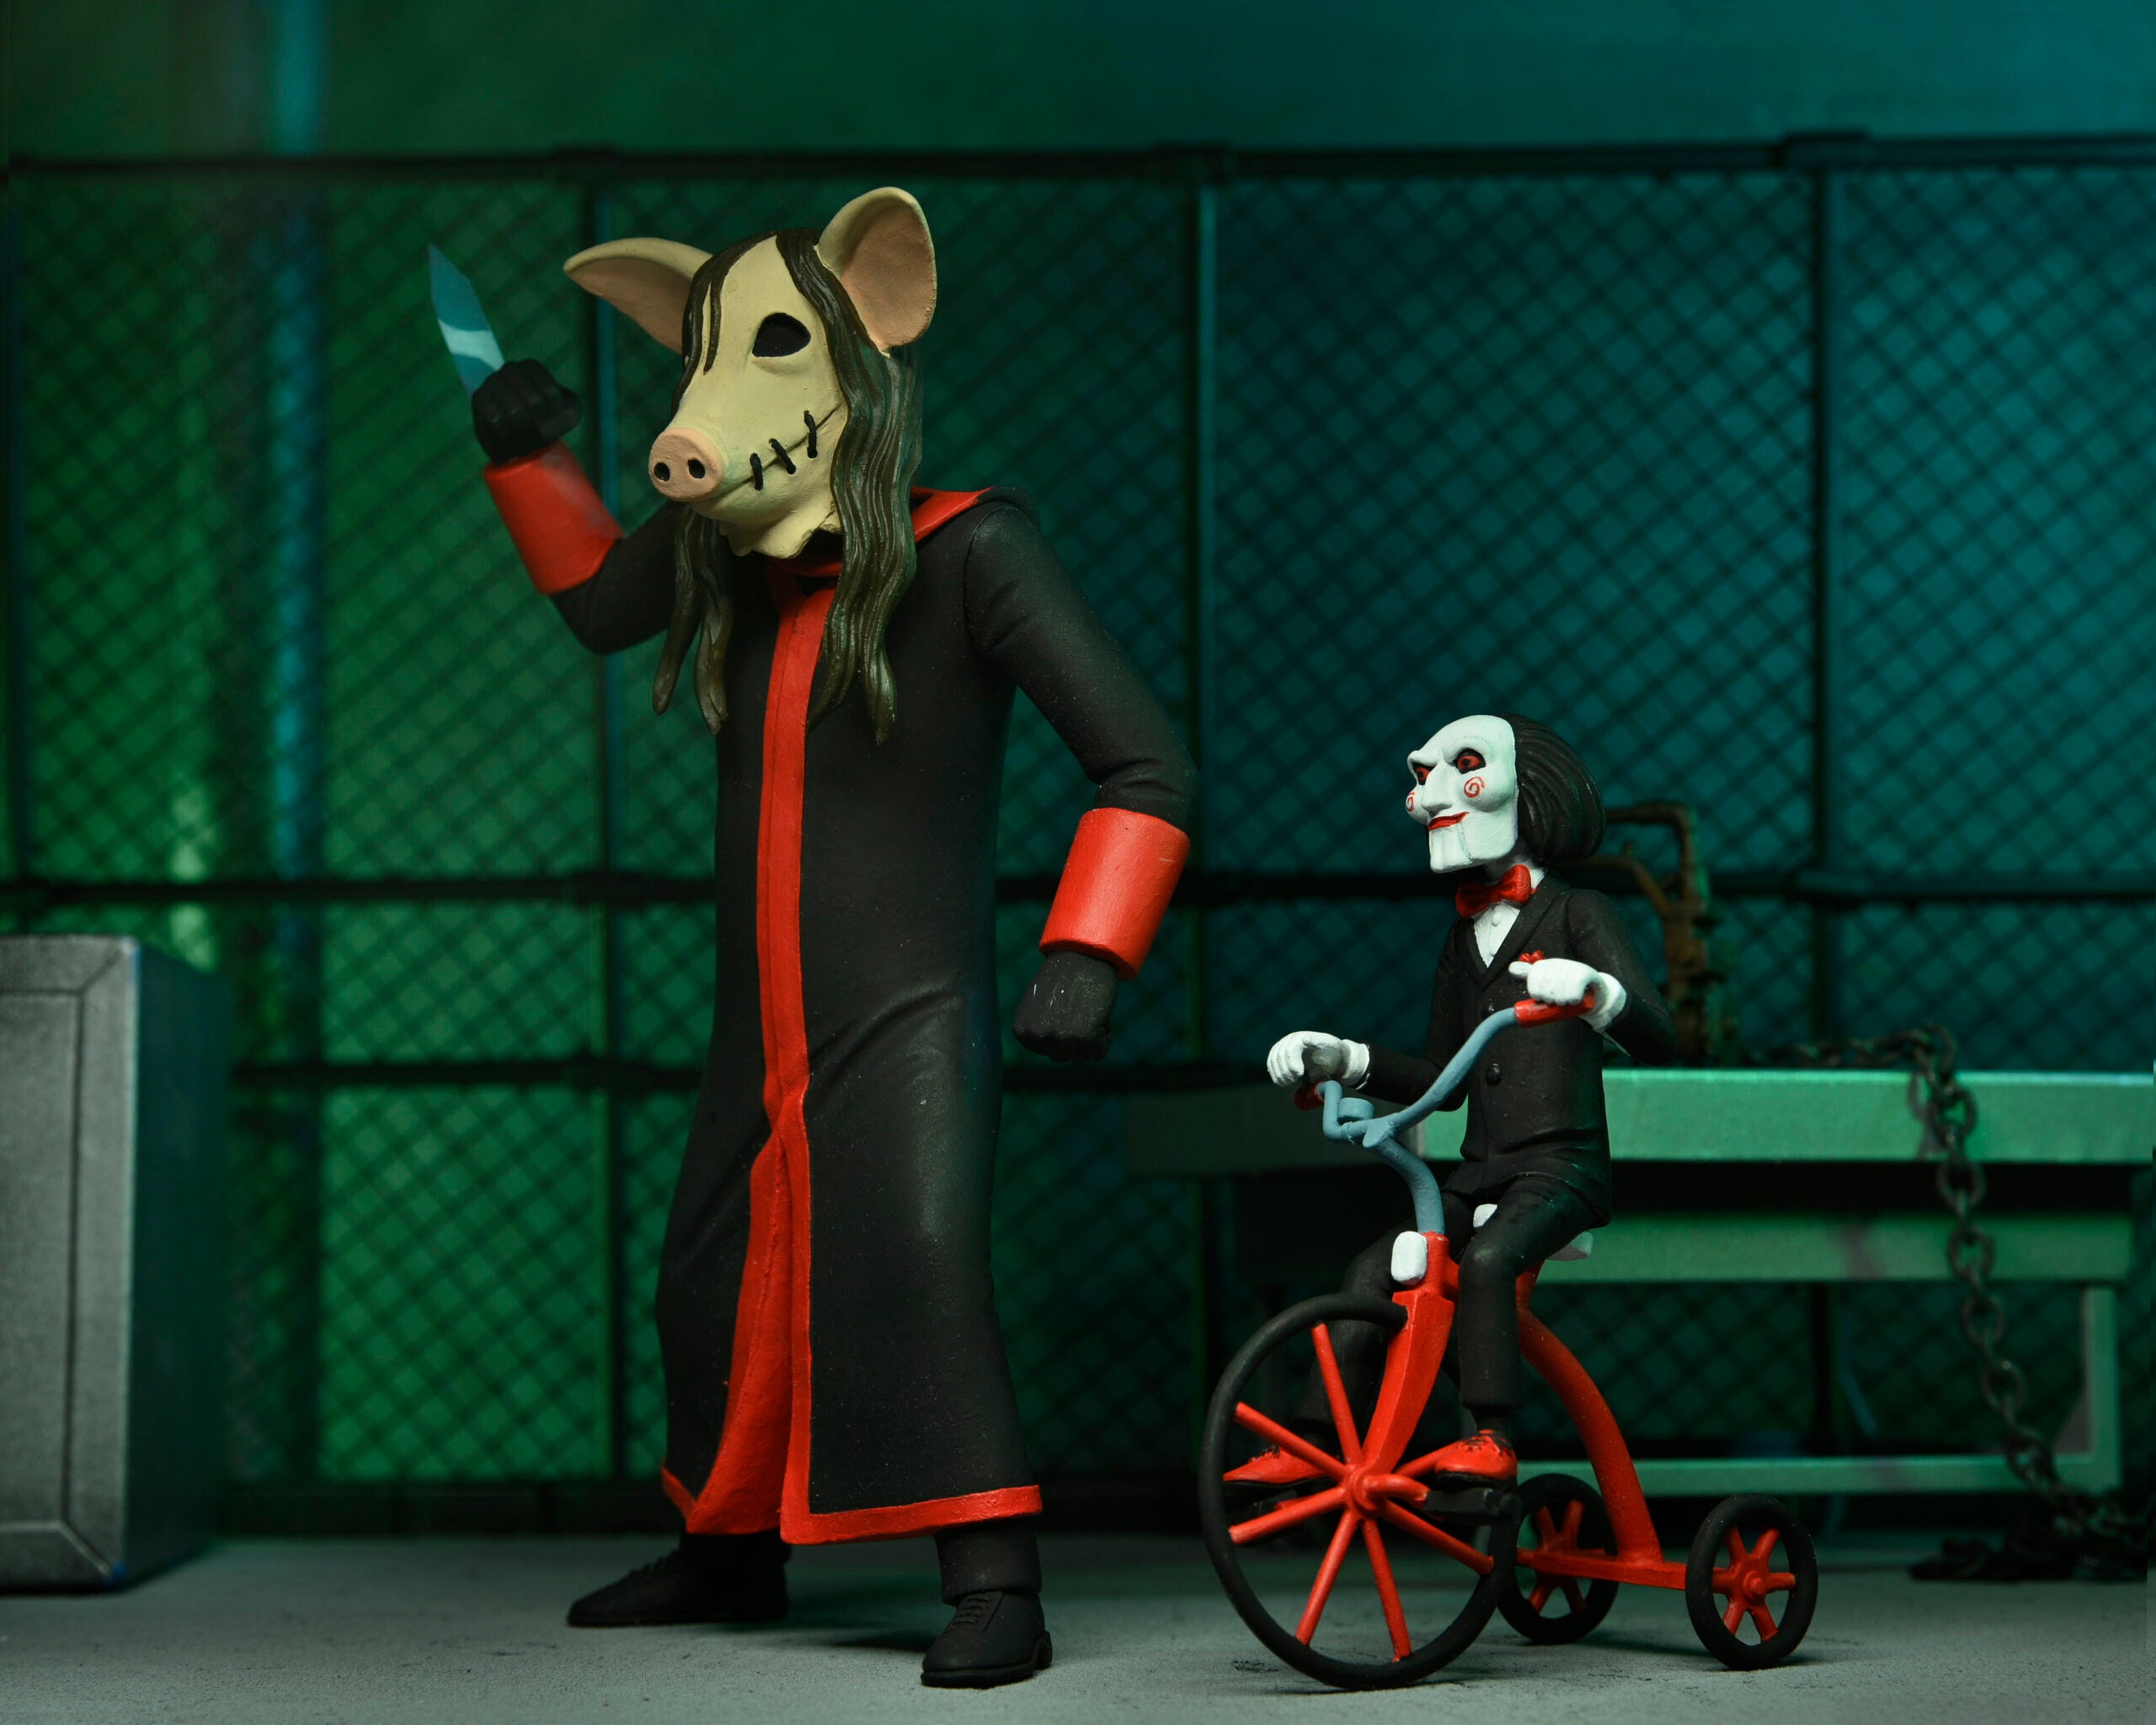 Saw: 6" Toony Terrors Jigsaw Killer w/ Billy and Tricycle Collectible Action Figure Box Set